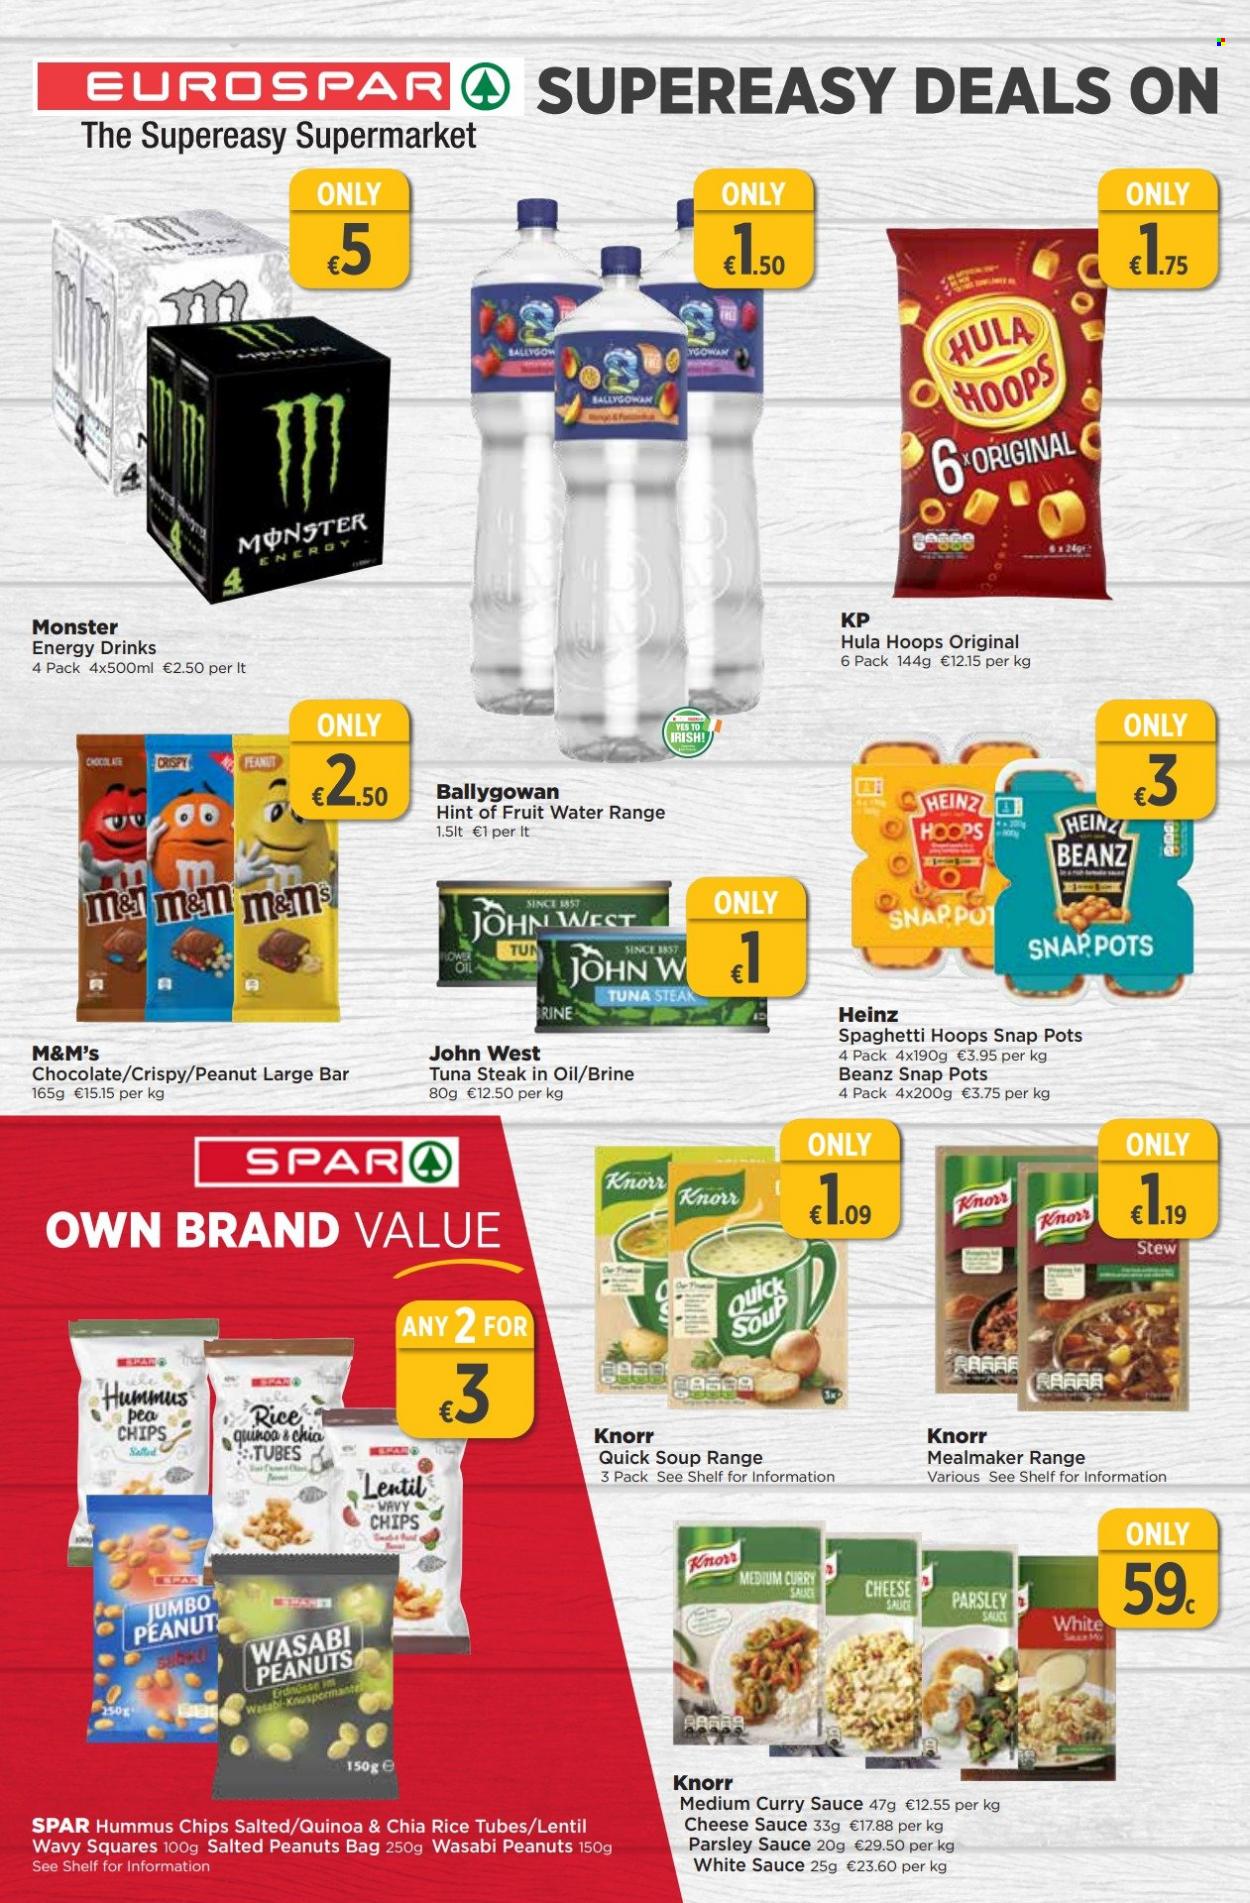 thumbnail - EUROSPAR offer  - 08.09.2022 - 28.09.2022 - Sales products - parsley, tuna, spaghetti, soup, Knorr, sauce, hummus, cheese, chocolate, M&M's, chips, Hula Hoops, tuna steak, Heinz, quinoa, wasabi, curry sauce, peanuts, energy drink, Monster, Ballygowan, Monster Energy, steak. Page 10.